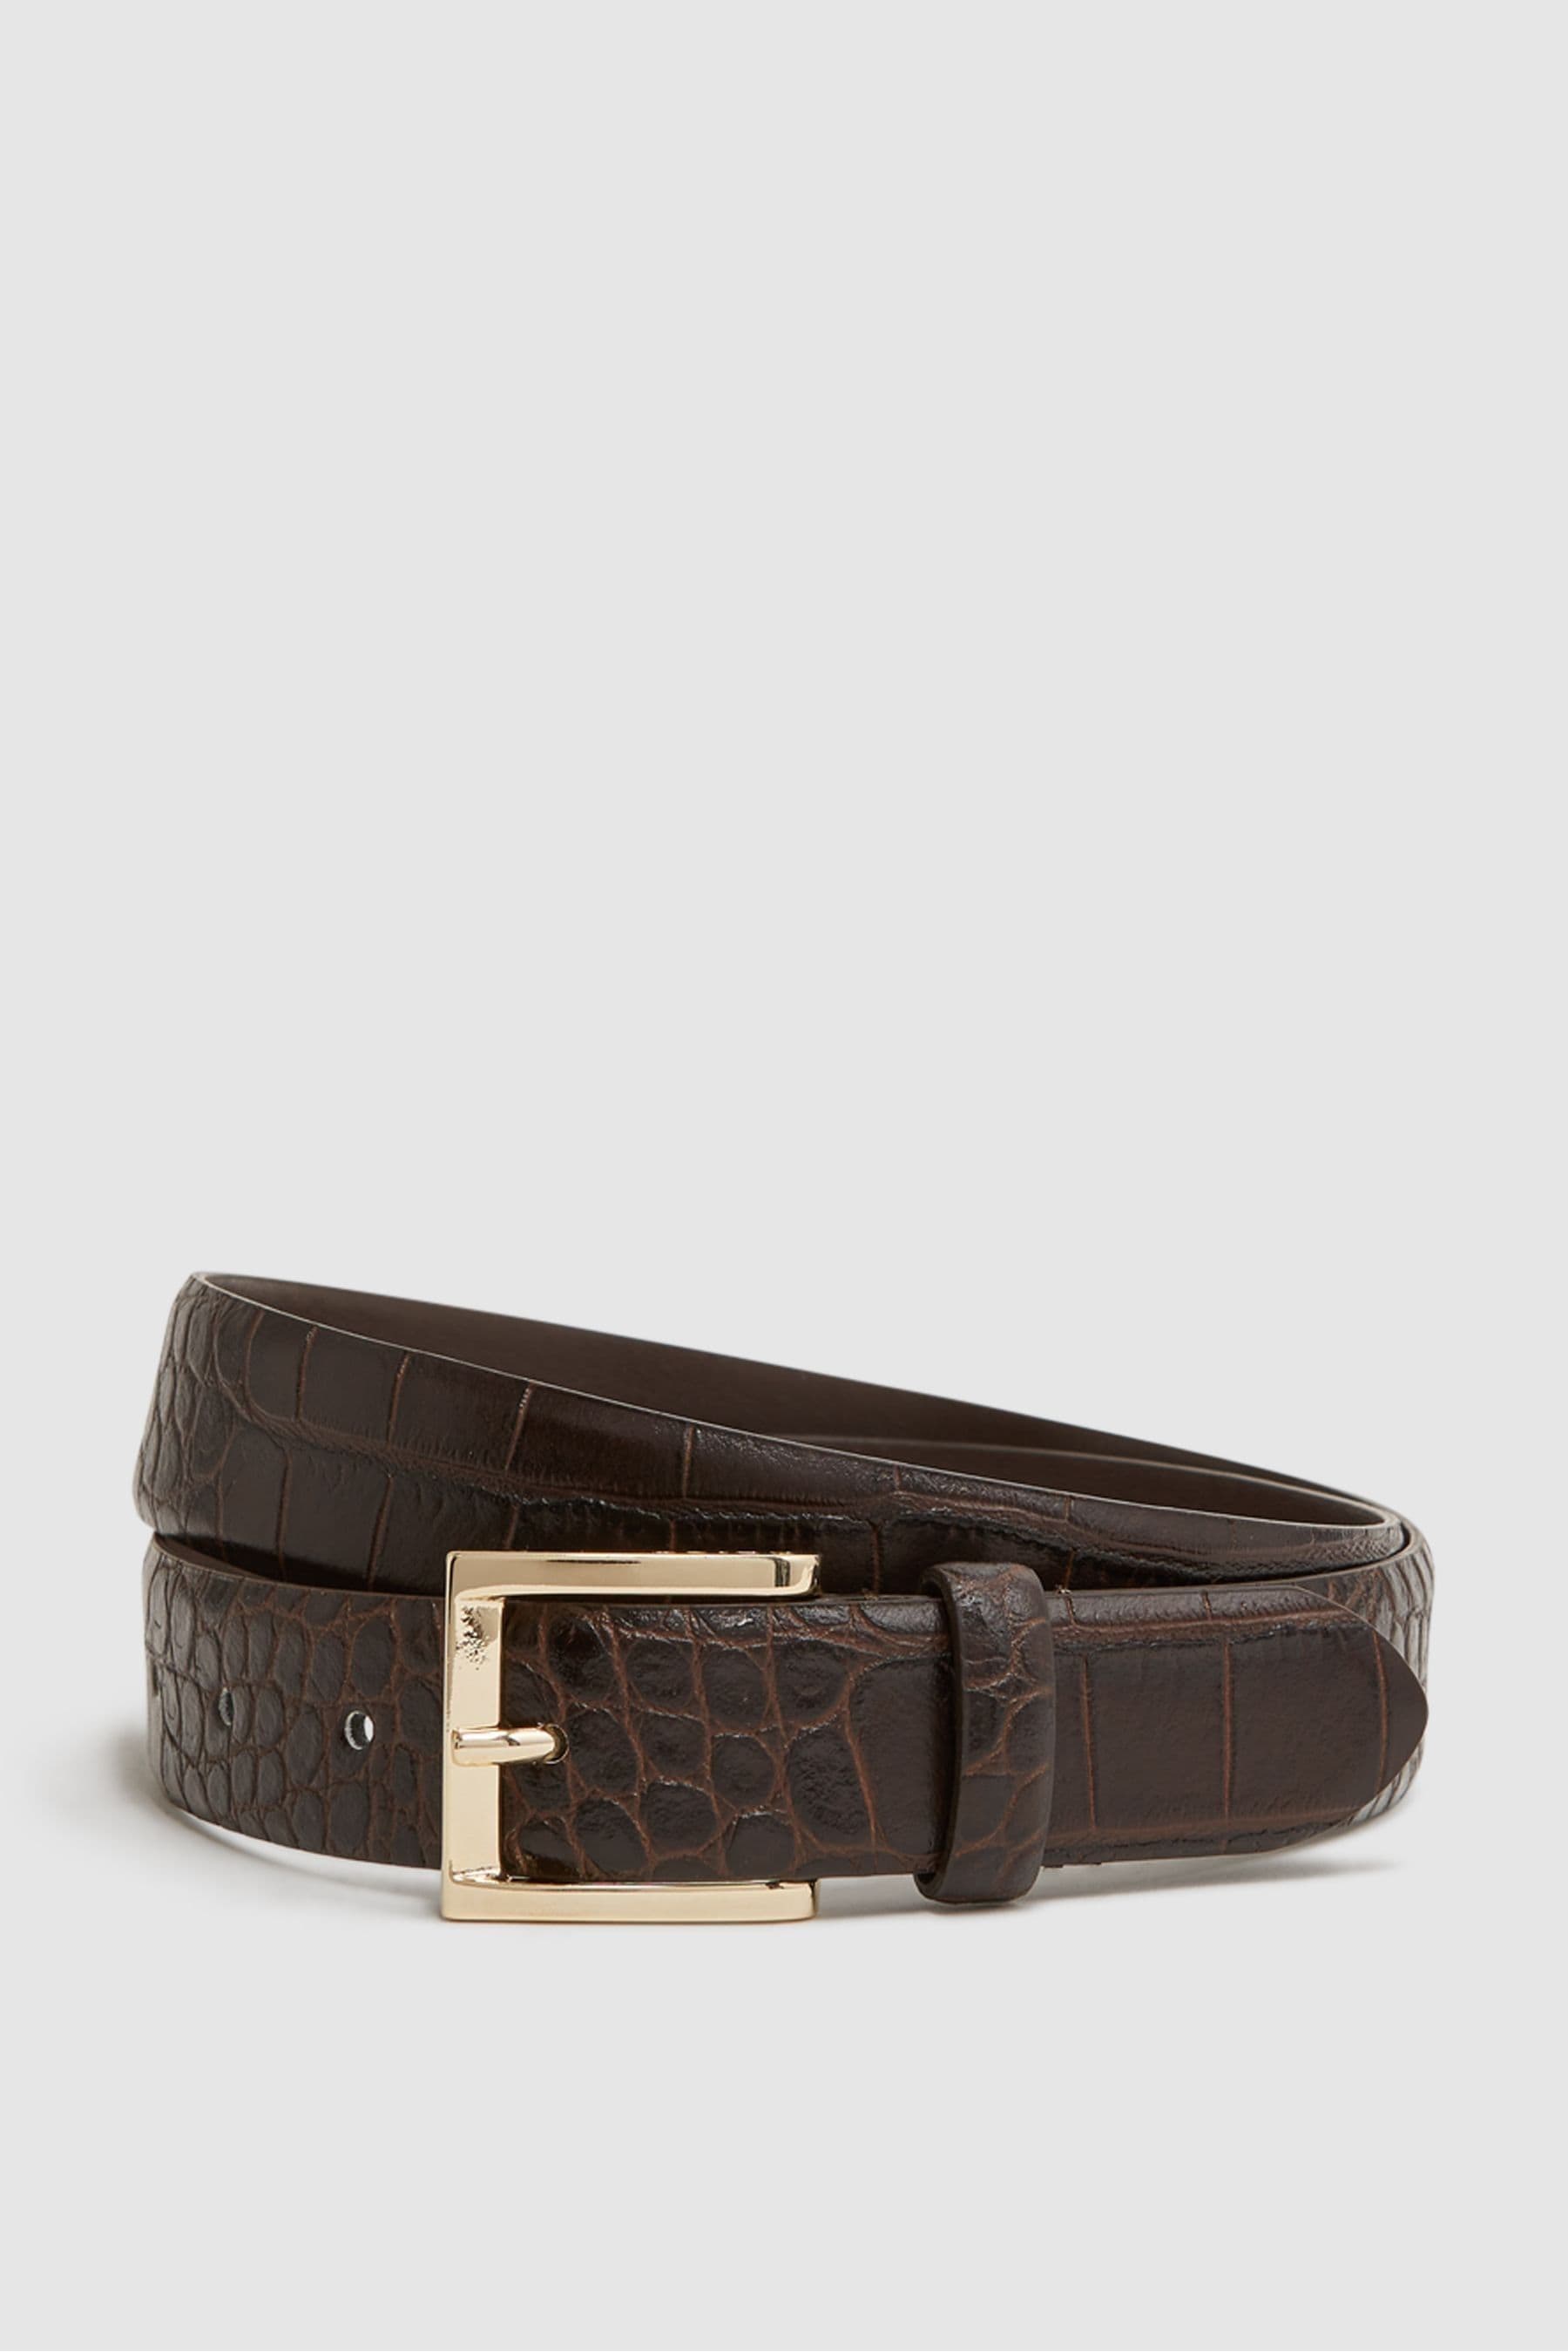 Shop Reiss Albany - Chocolate Albany Leather Belt, 36